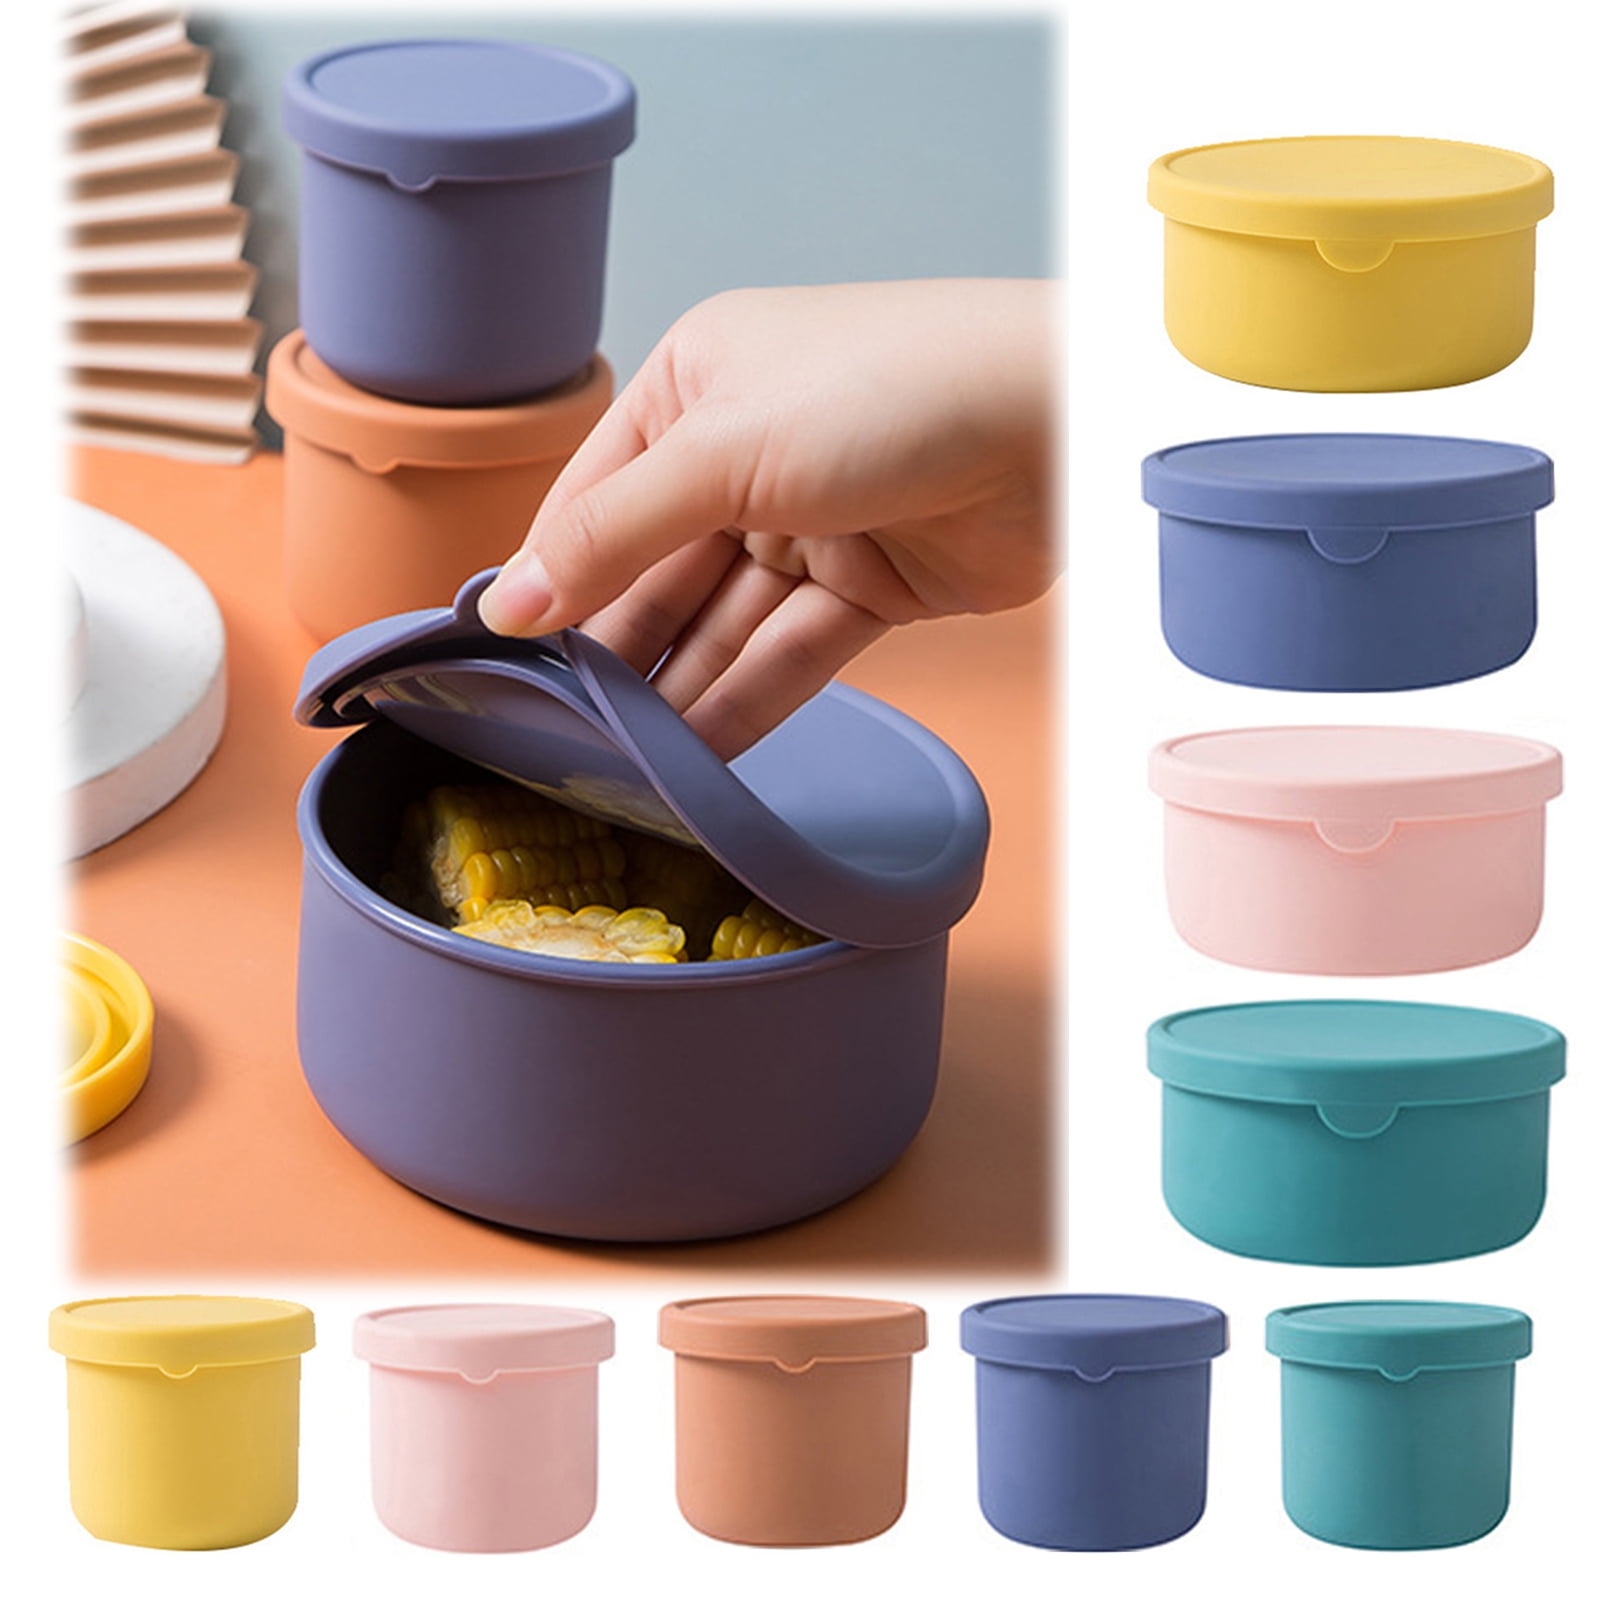 Hotbest 3pcs Collapsible Food Storage Containers with Lids Silicone Leak-Proof Airtight Microwave Meal Container Thin Lunch Bento Box Bowls, Adult